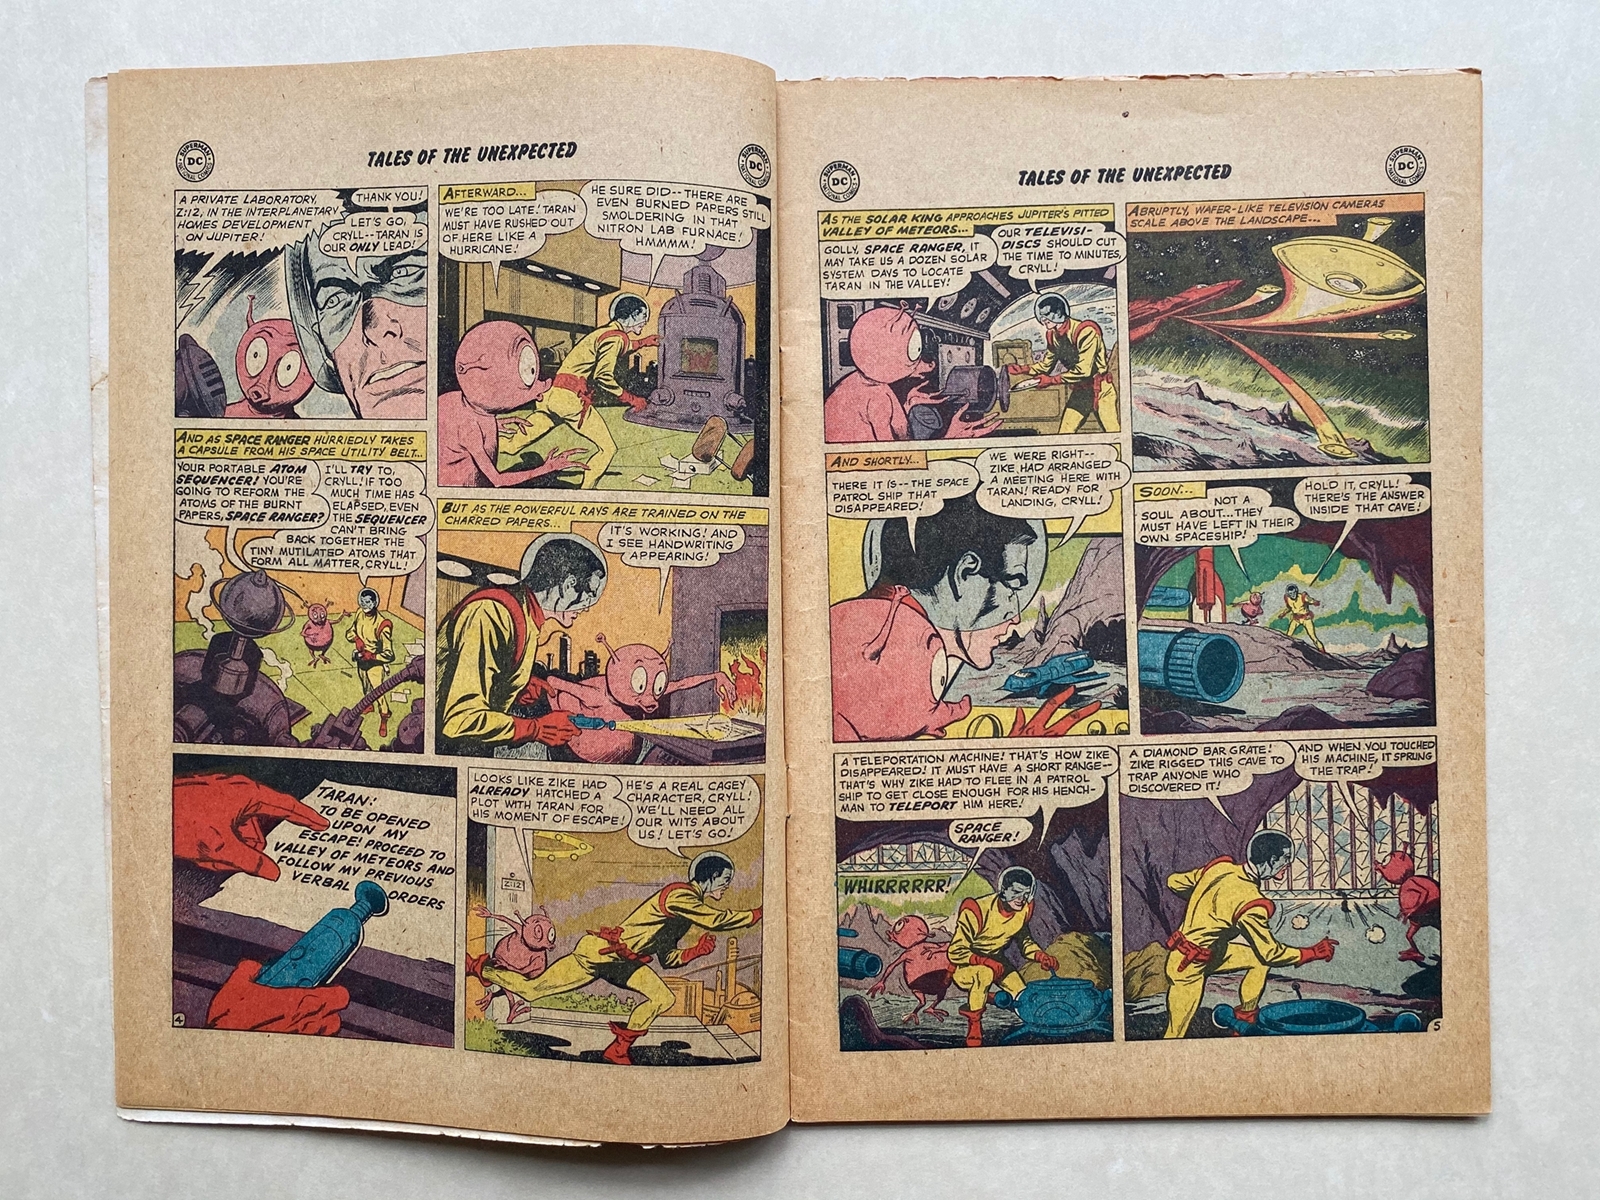 TALES OF THE UNEXPECTED #40 - (1959 - DC - Cents Copy - GD/VG) - Space Ranger features begin - Bob - Image 7 of 7